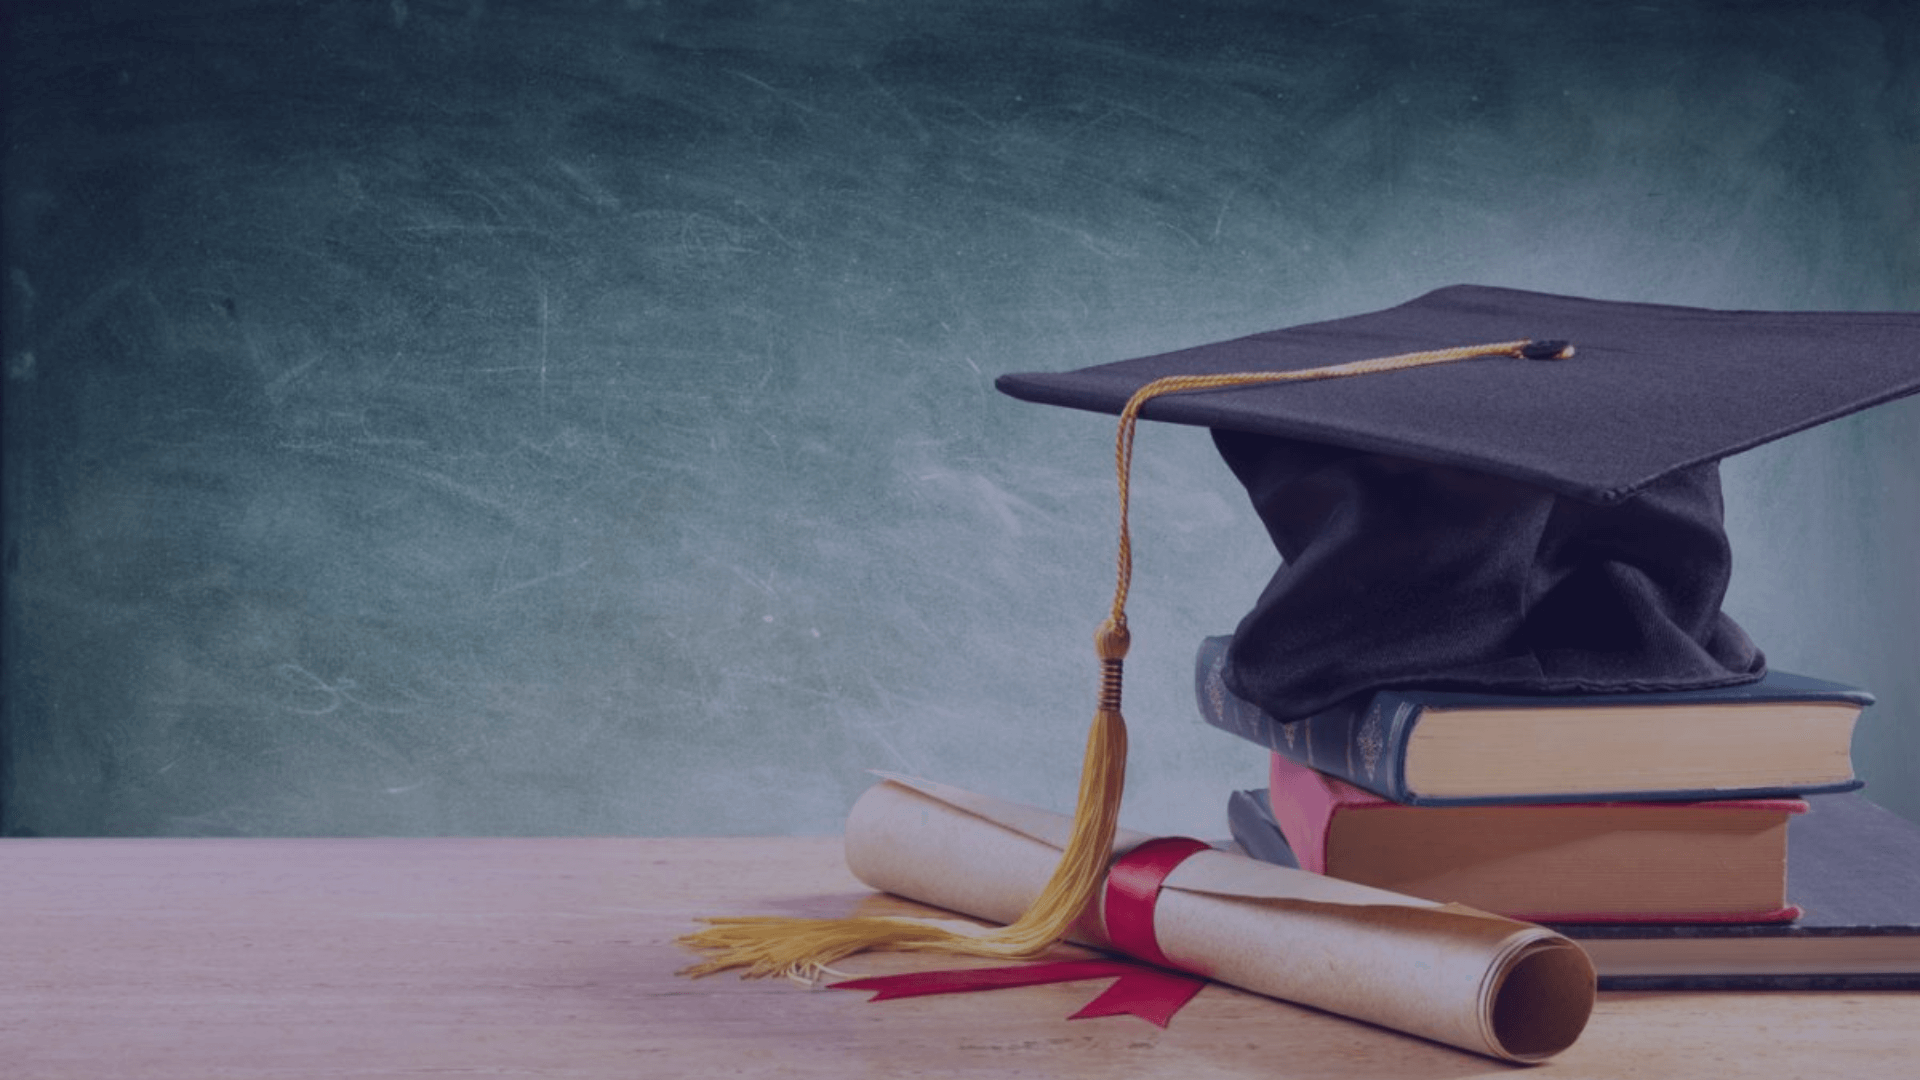 An image of the mortarboard, a hat worn at university graduations. A hat is placed on the pile of books and a university diploma is next to it. Education planning and benefits you need to know